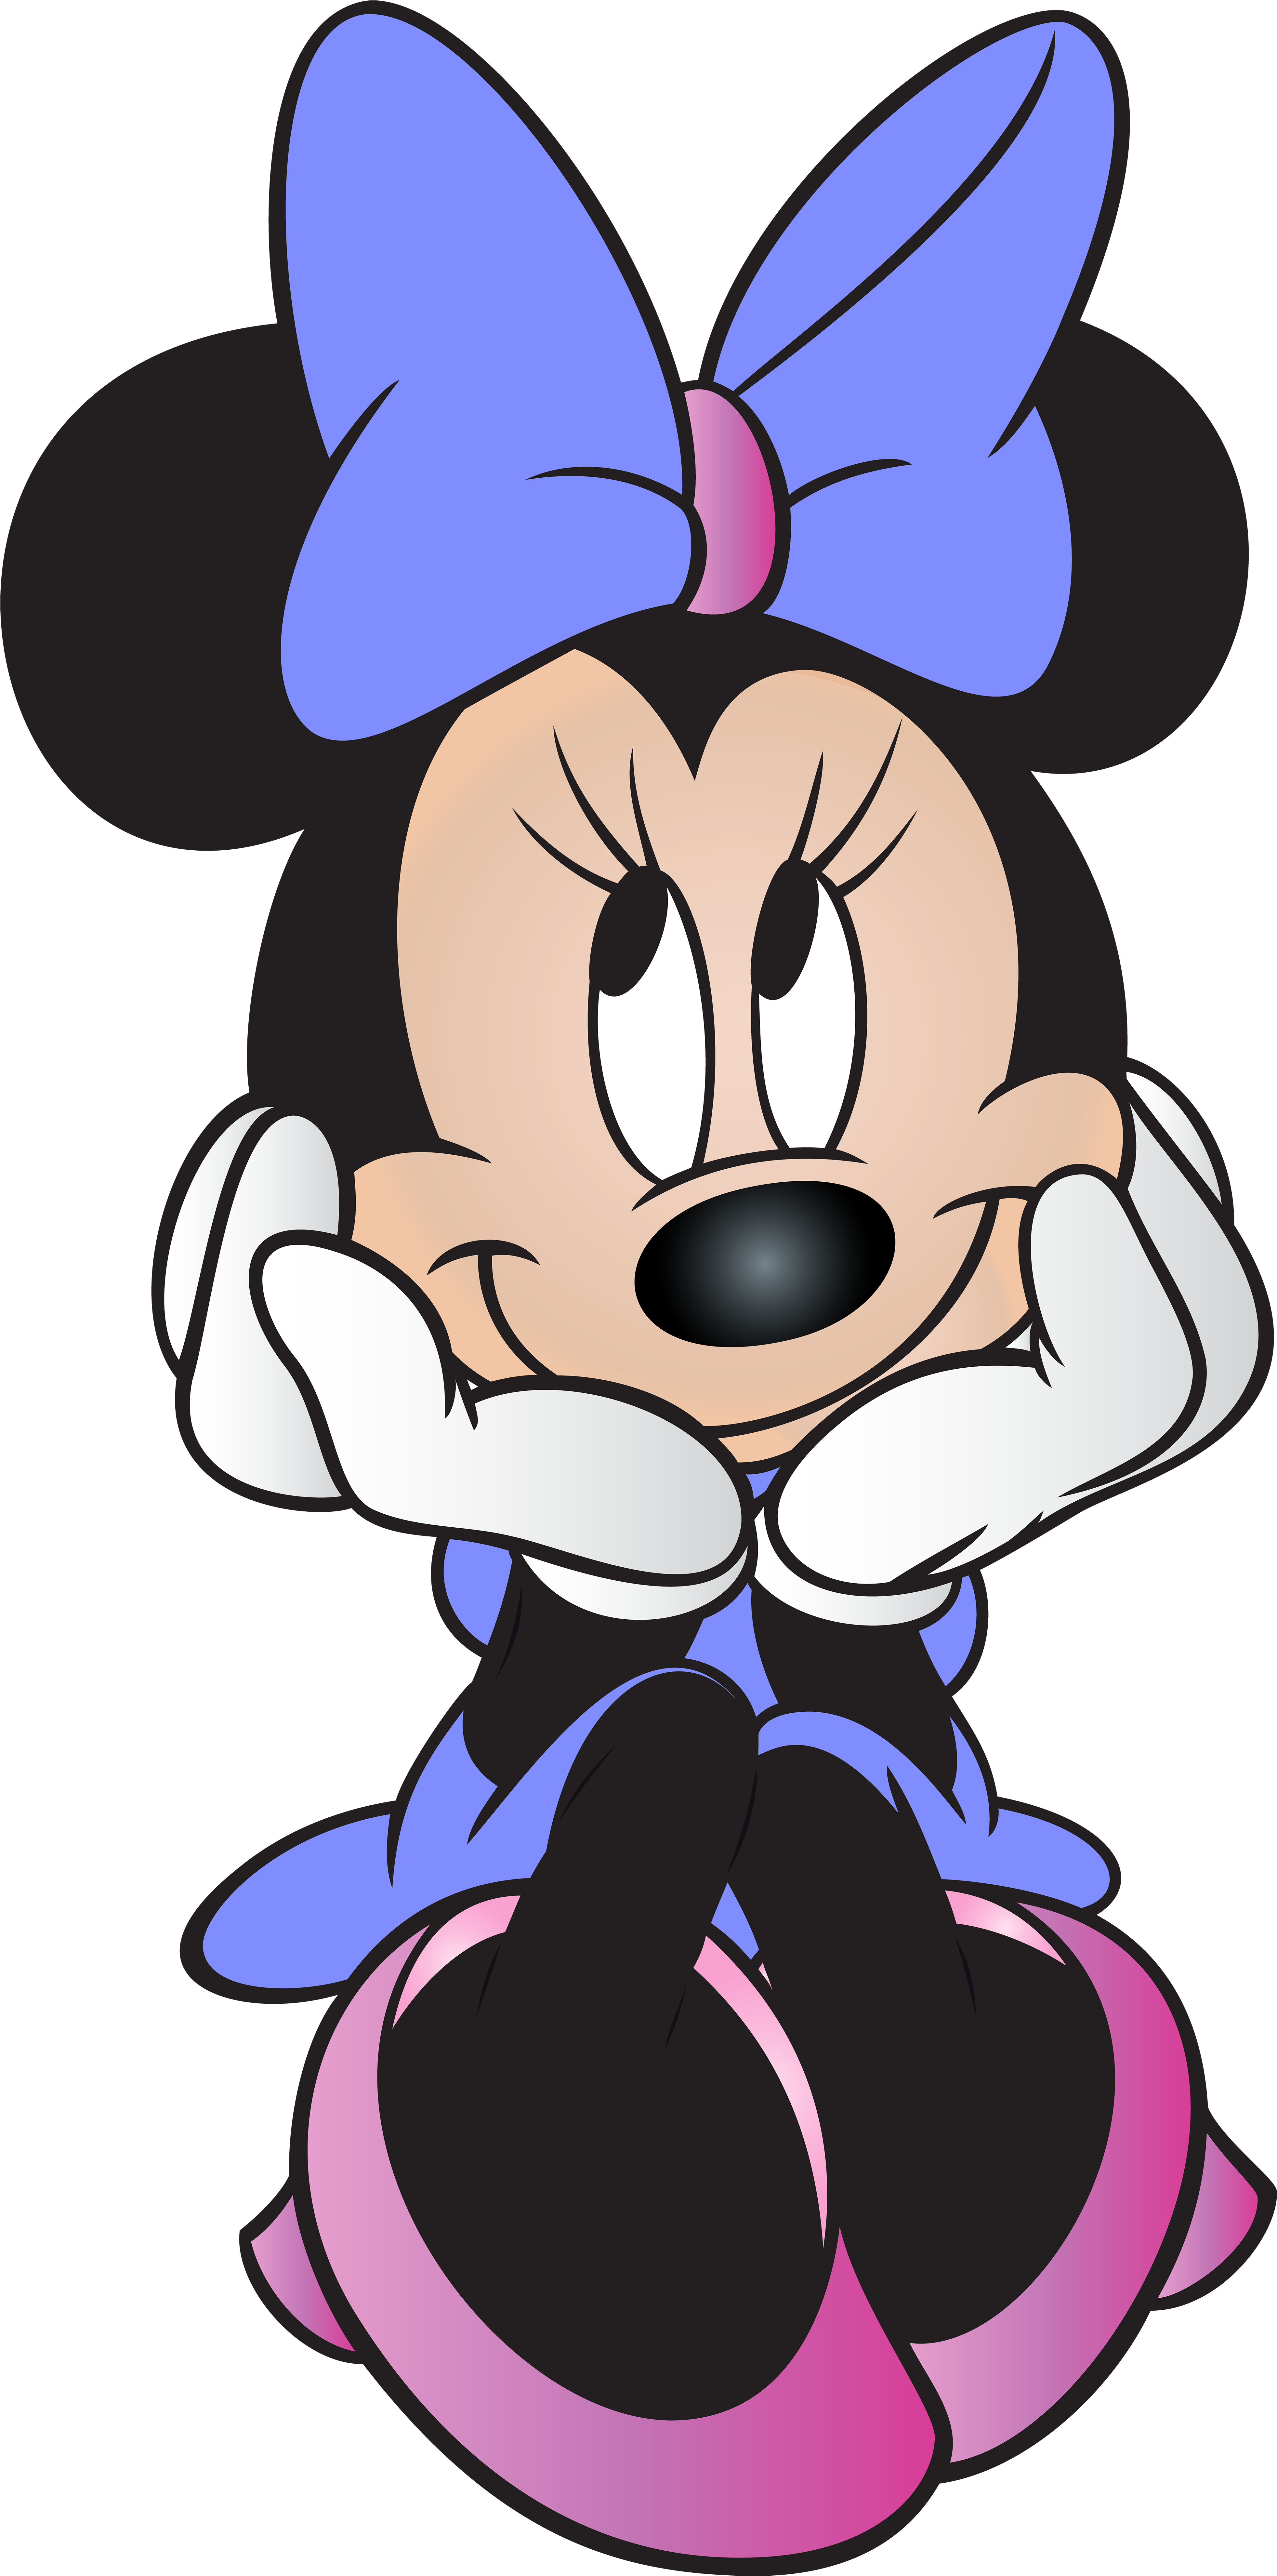 Download Disney Iphone 6 Cases, Iphone 6 Plus Case, Iphone 5s, - Minnie  Mouse PNG Image with No Background 